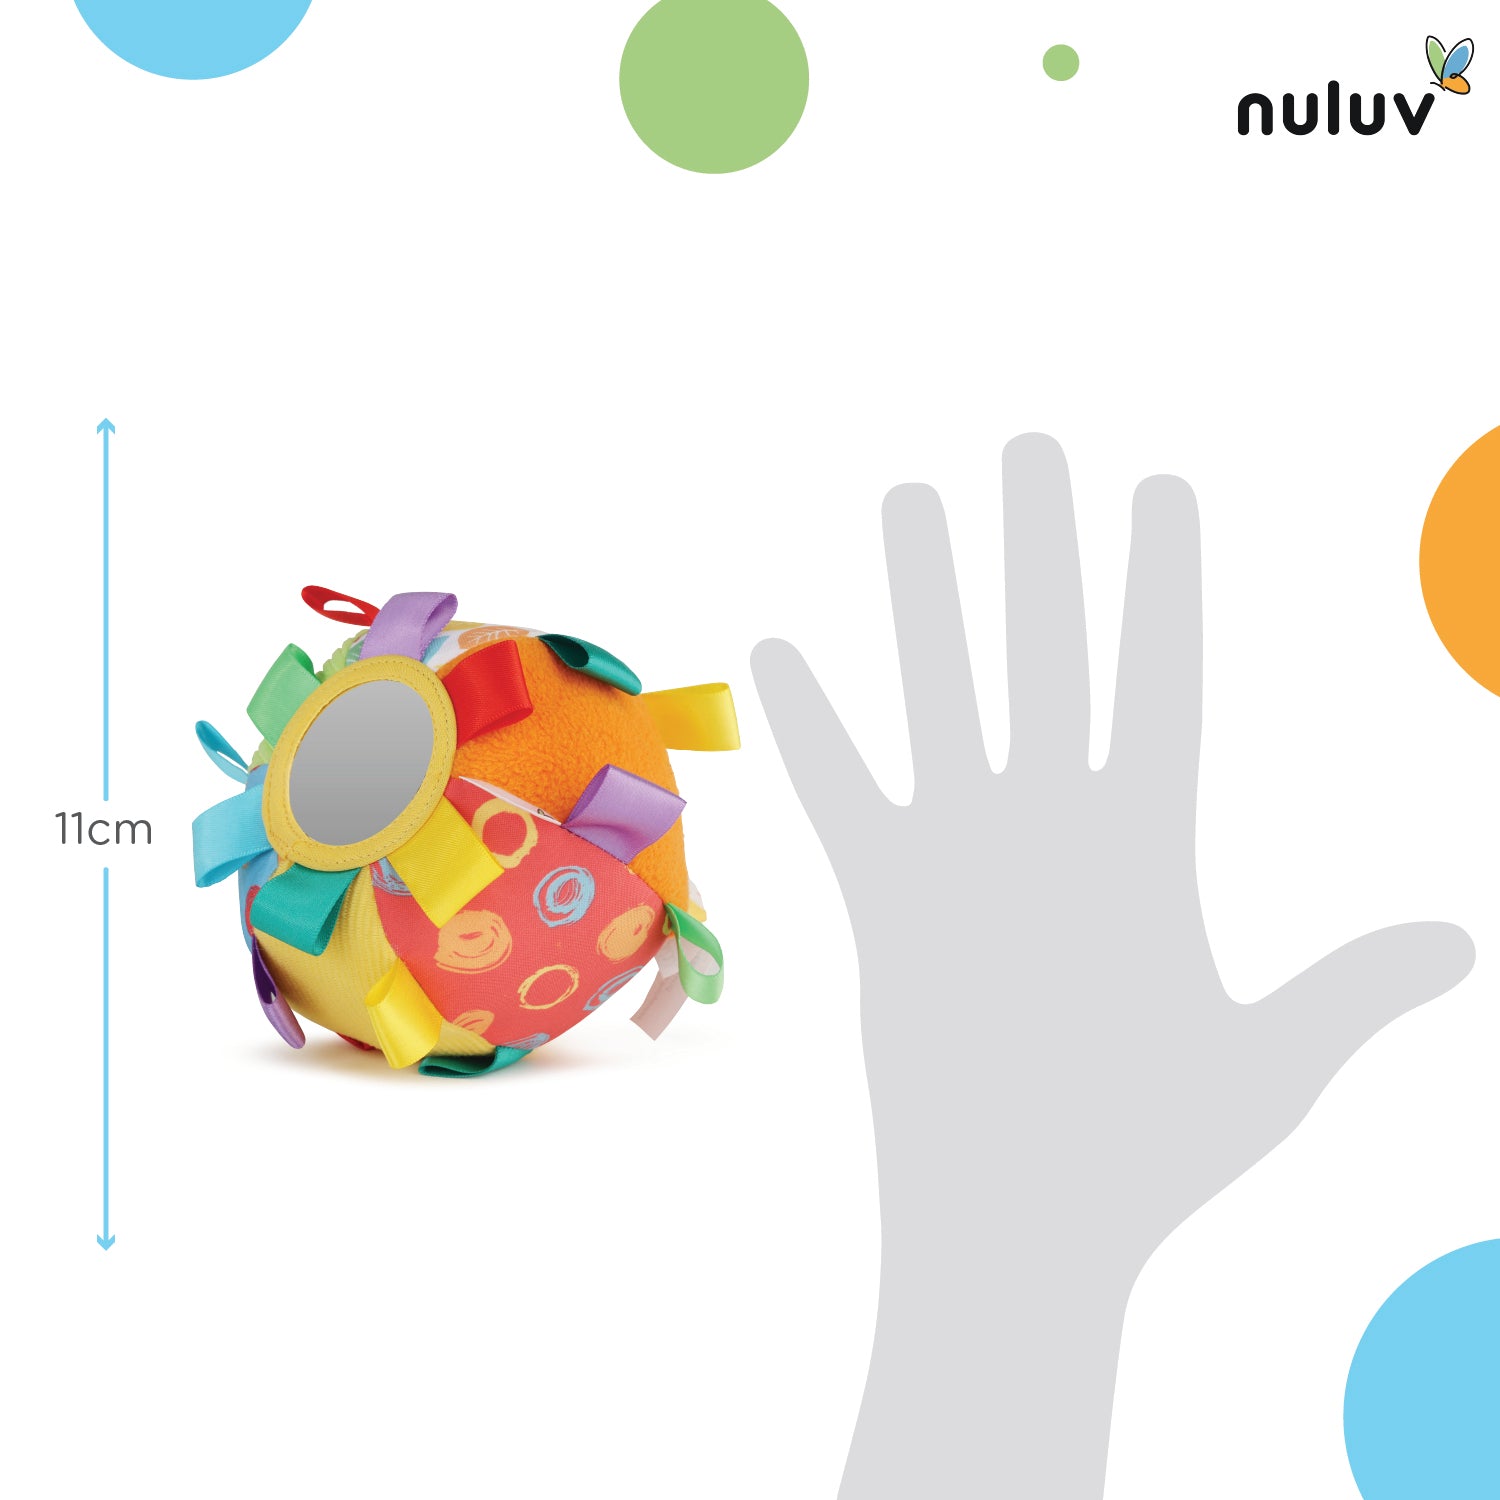 Nuluv Activity Ball - 2 - Soft Plush Baby Ball, Multicolor